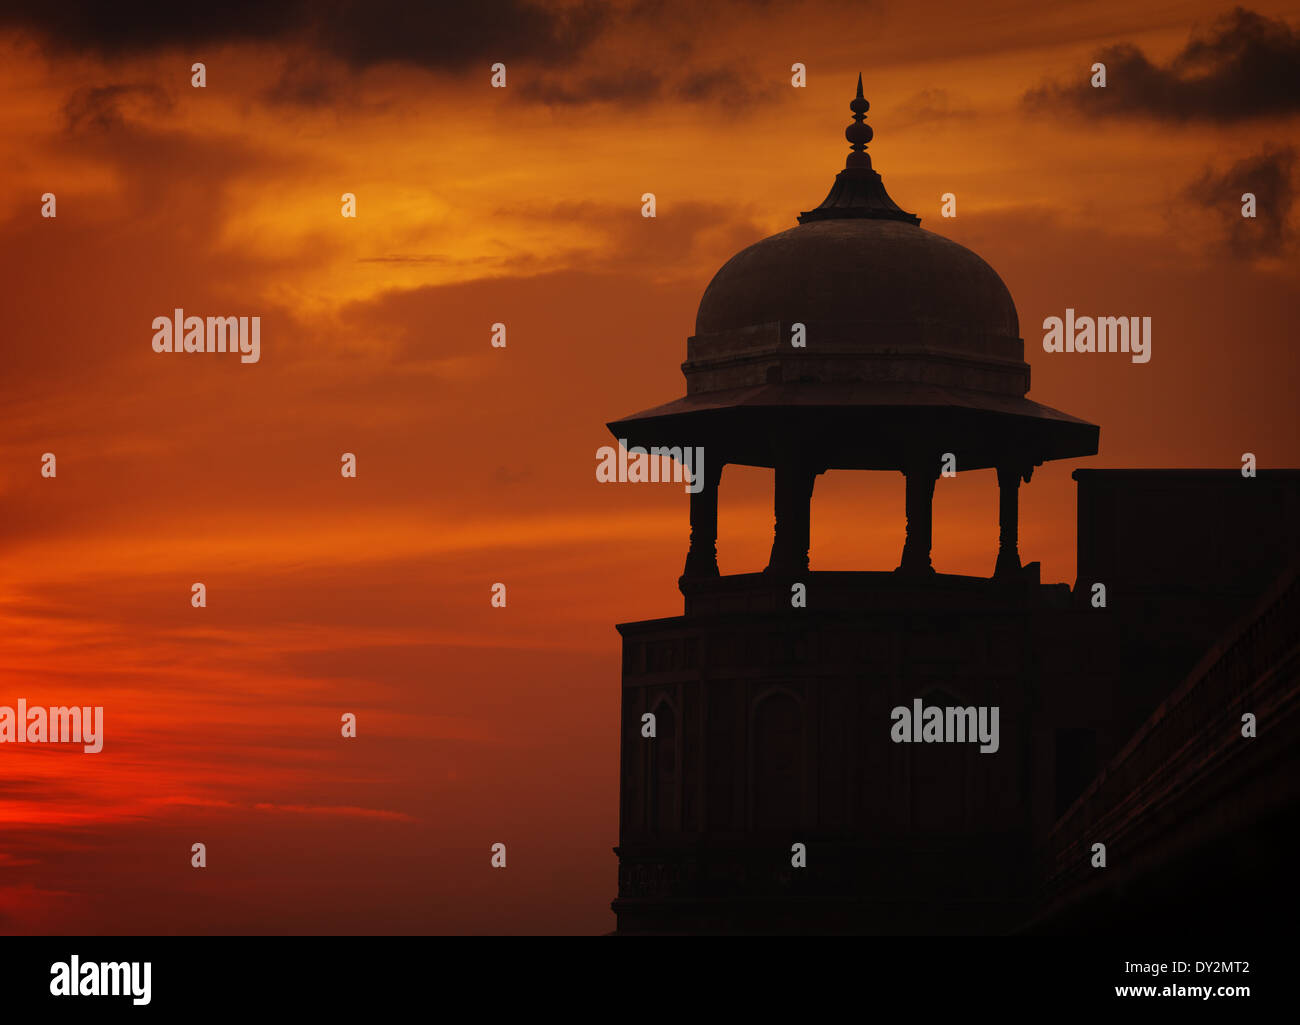 Silhouette of Asian style tower on sunset sky background, Red ford, Agra, India Stock Photo